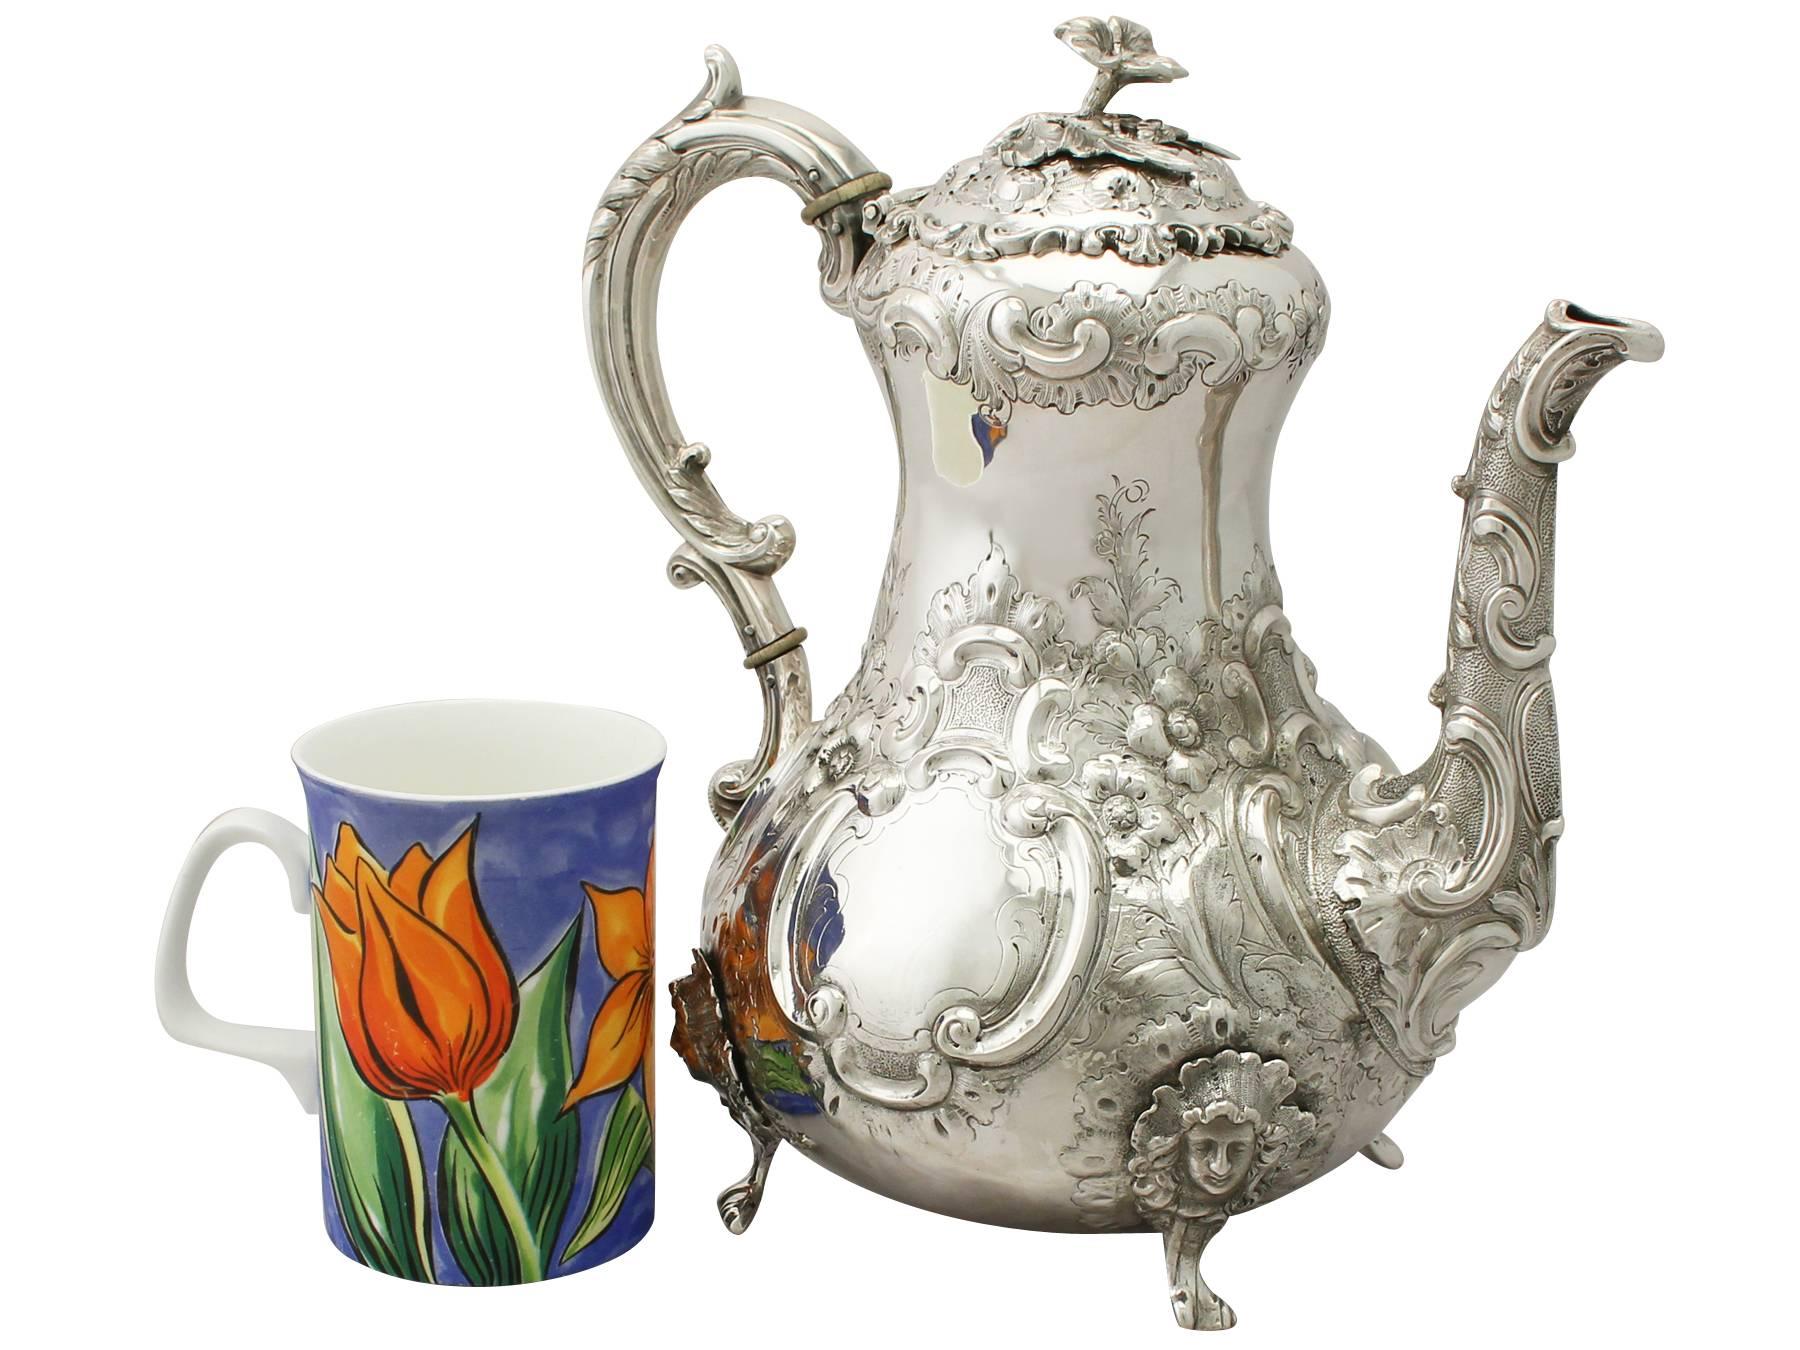 An exceptional, fine and impressive antique Victorian Irish sterling silver coffee pot; an addition to our silver teaware collection.

This exceptional antique Victorian Irish sterling silver coffee pot has a baluster shaped form onto four bracket